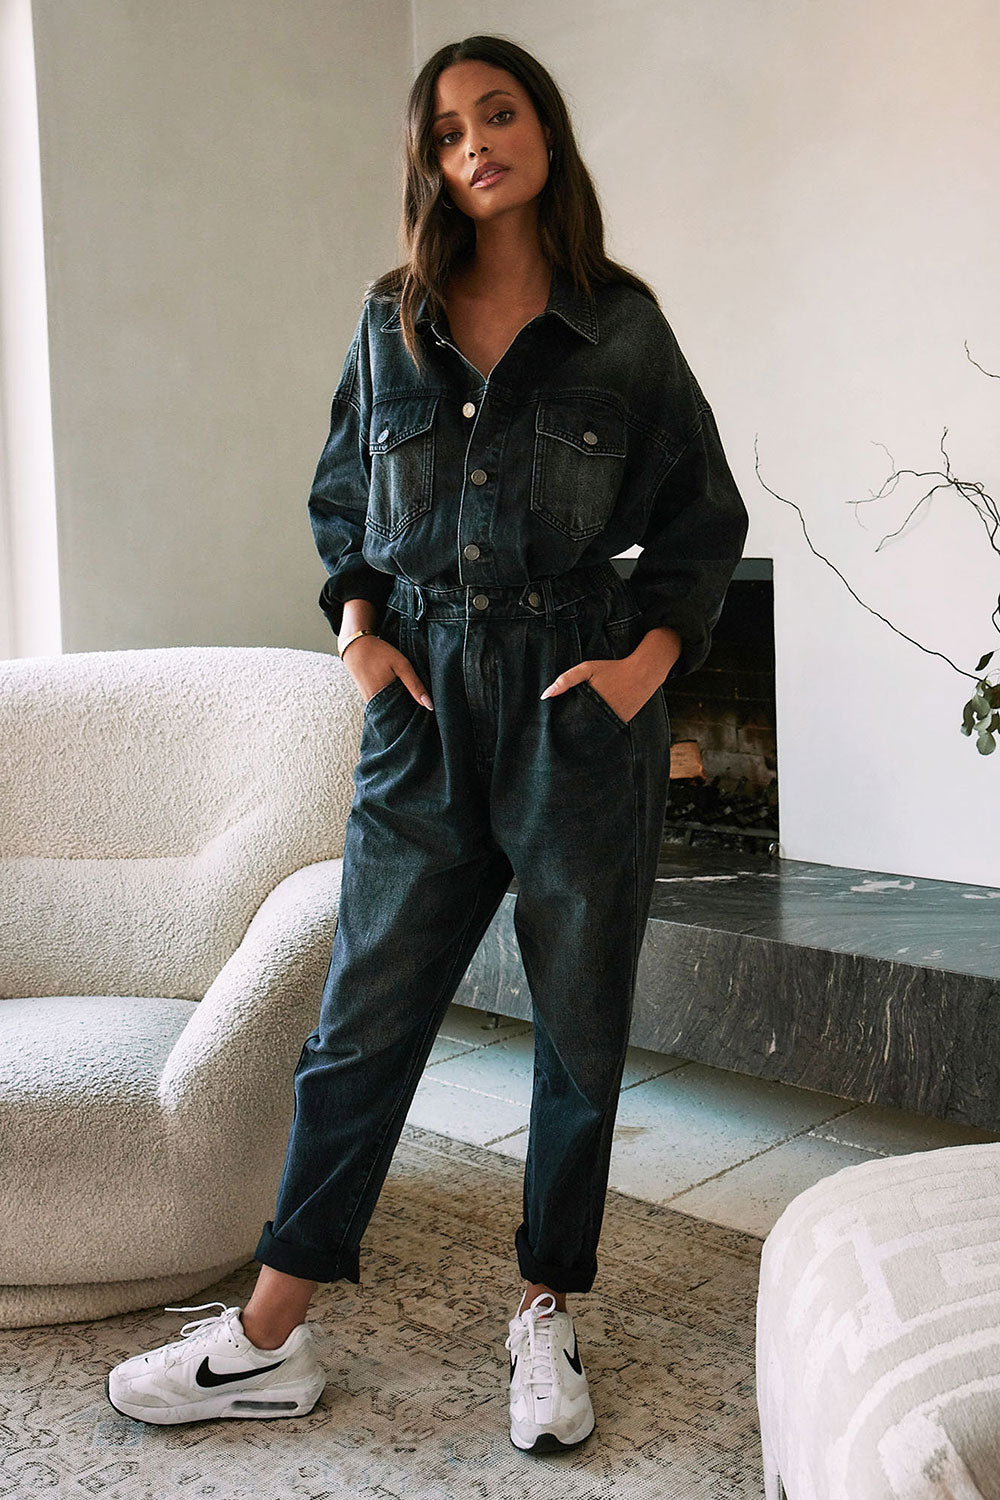 Denver Coverall - Saltwater Luxe